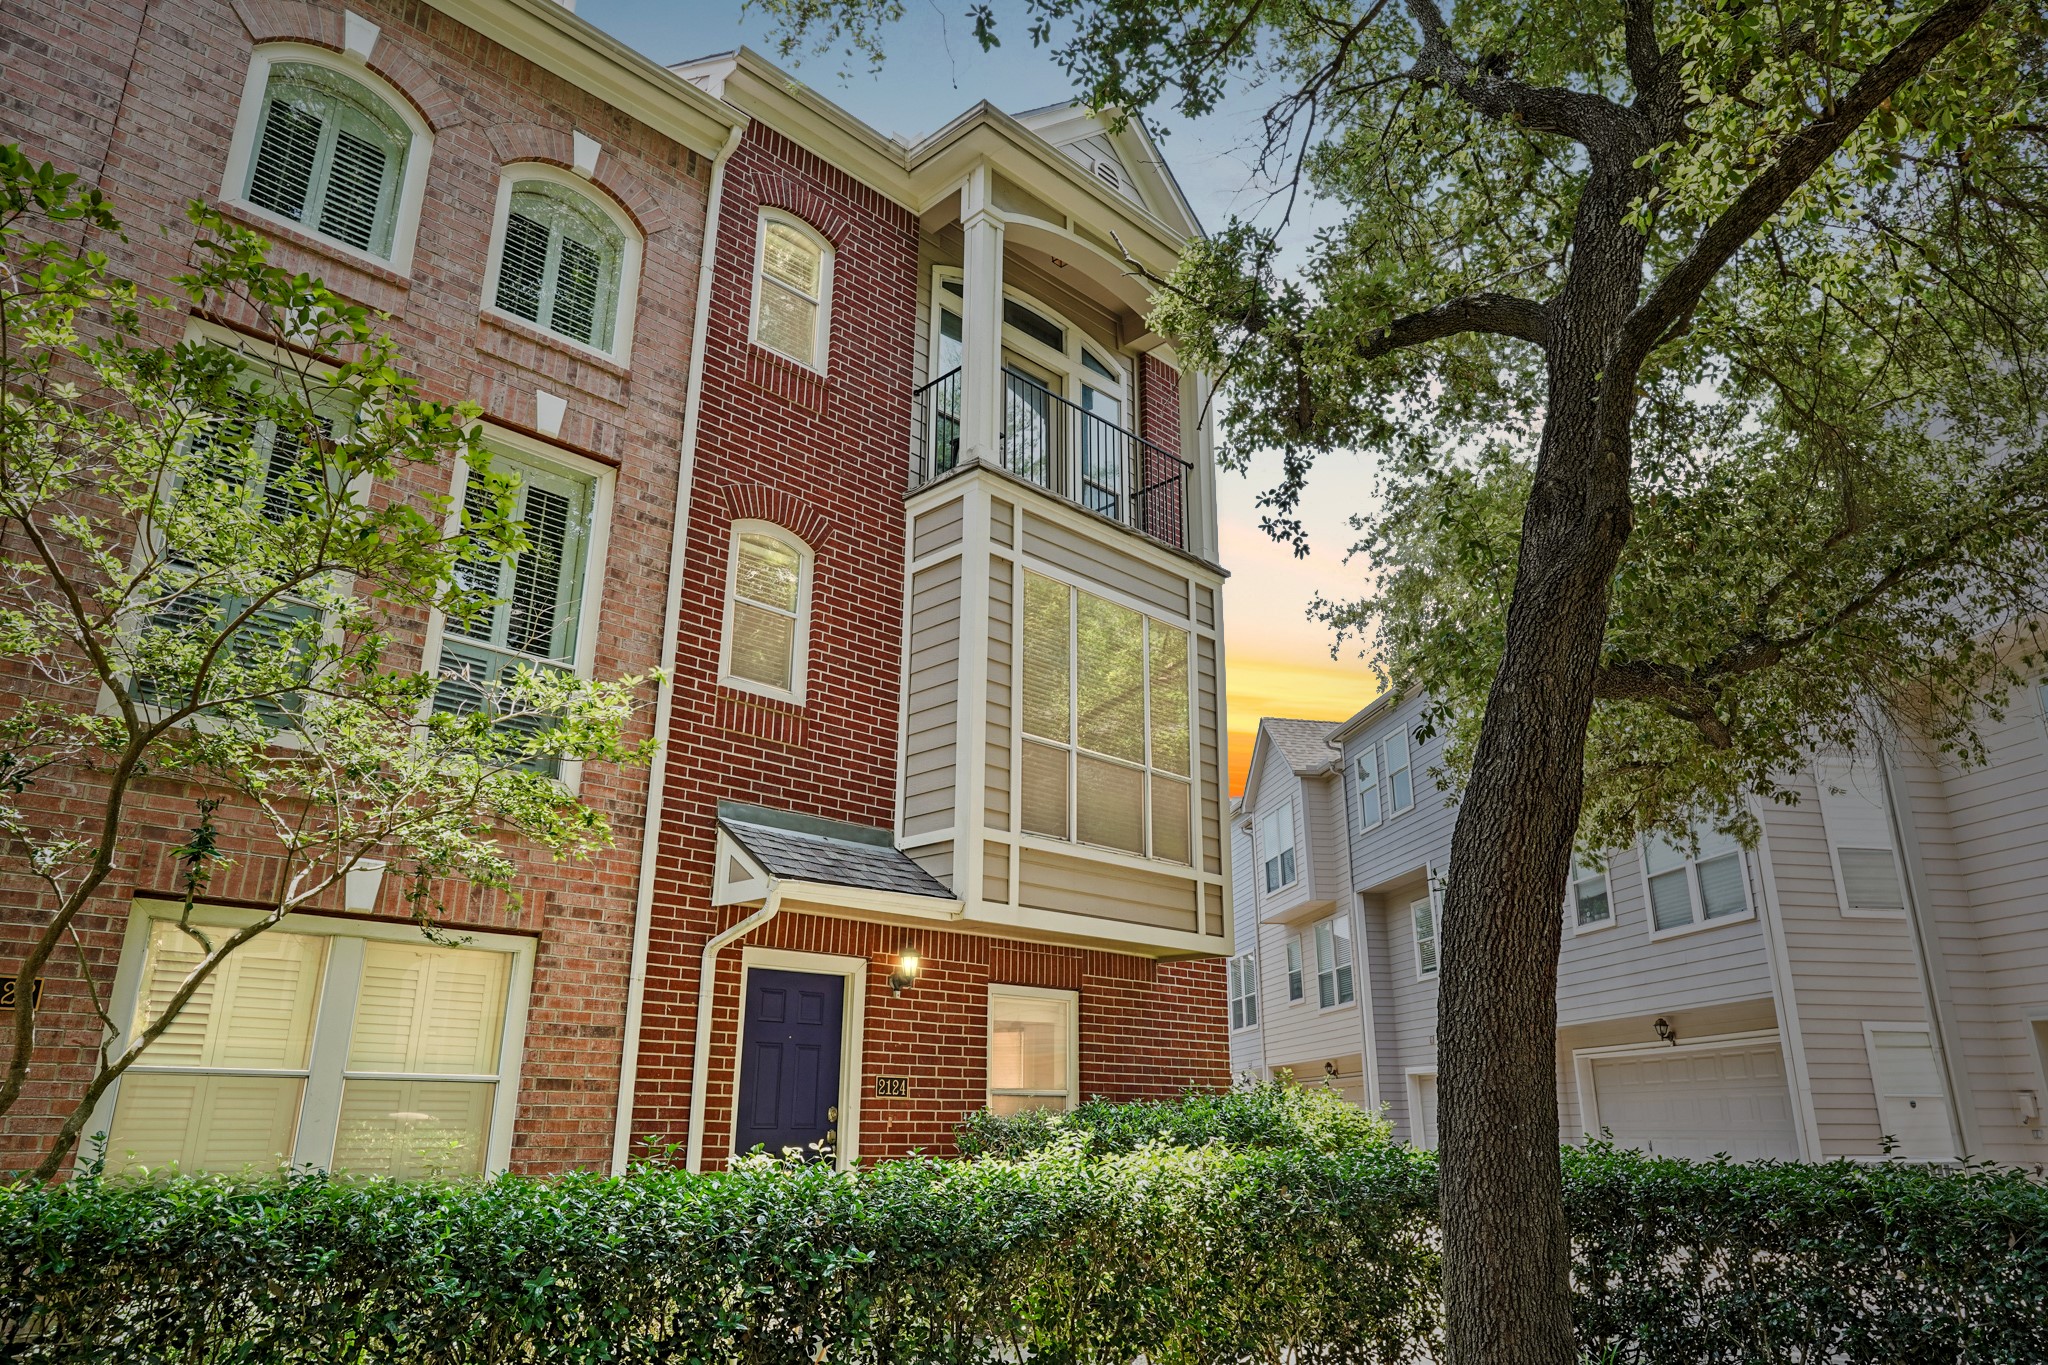 Welcome home to 2124 Gillette St! This stunning 3 story townhome sits at 2,130 sqft and boasts 2 Bedrooms, 2 1/2 Bathrooms, and a spacious private backyard!